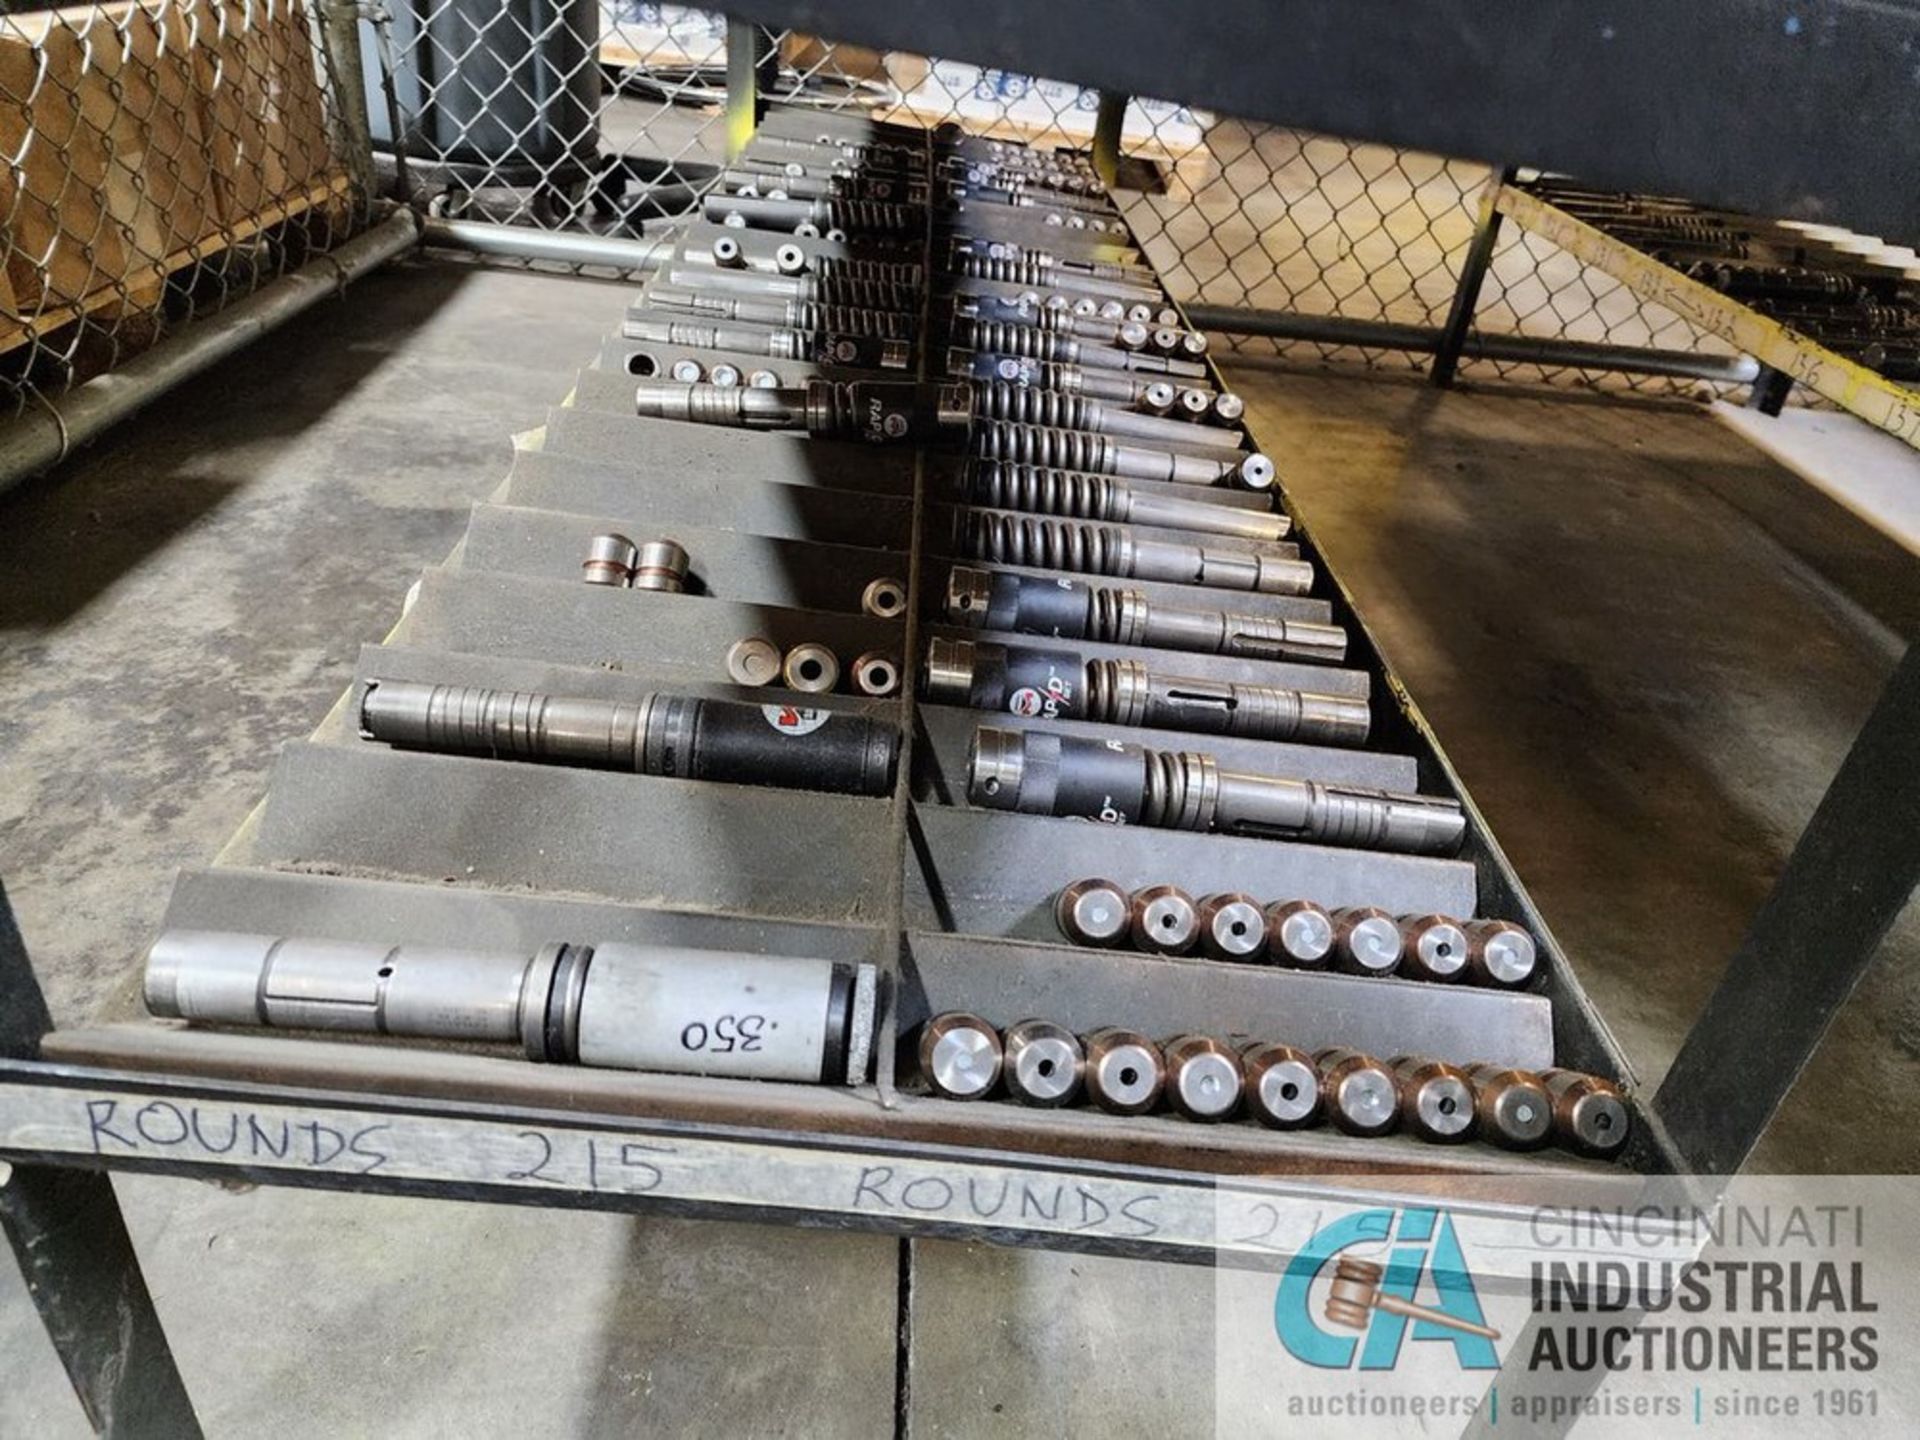 (Lot) Turret Punch Tooling W/ Matl. Cart: 72" x 24" x 48"H - Image 52 of 67